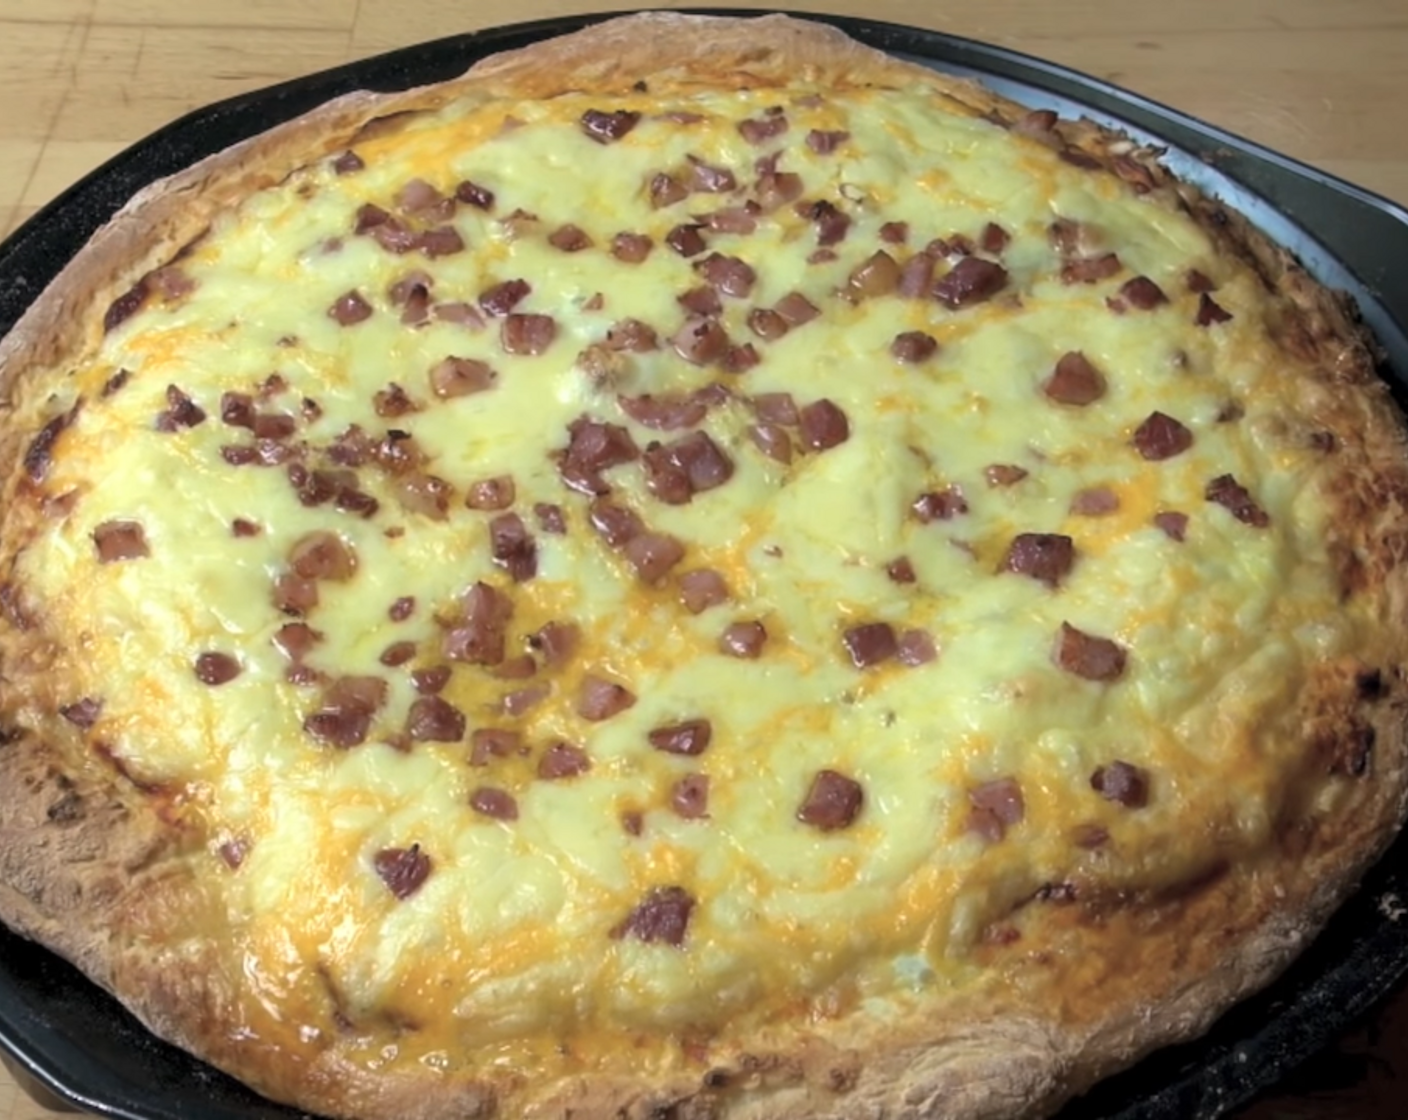 Aussie Bacon and Egg Pizza